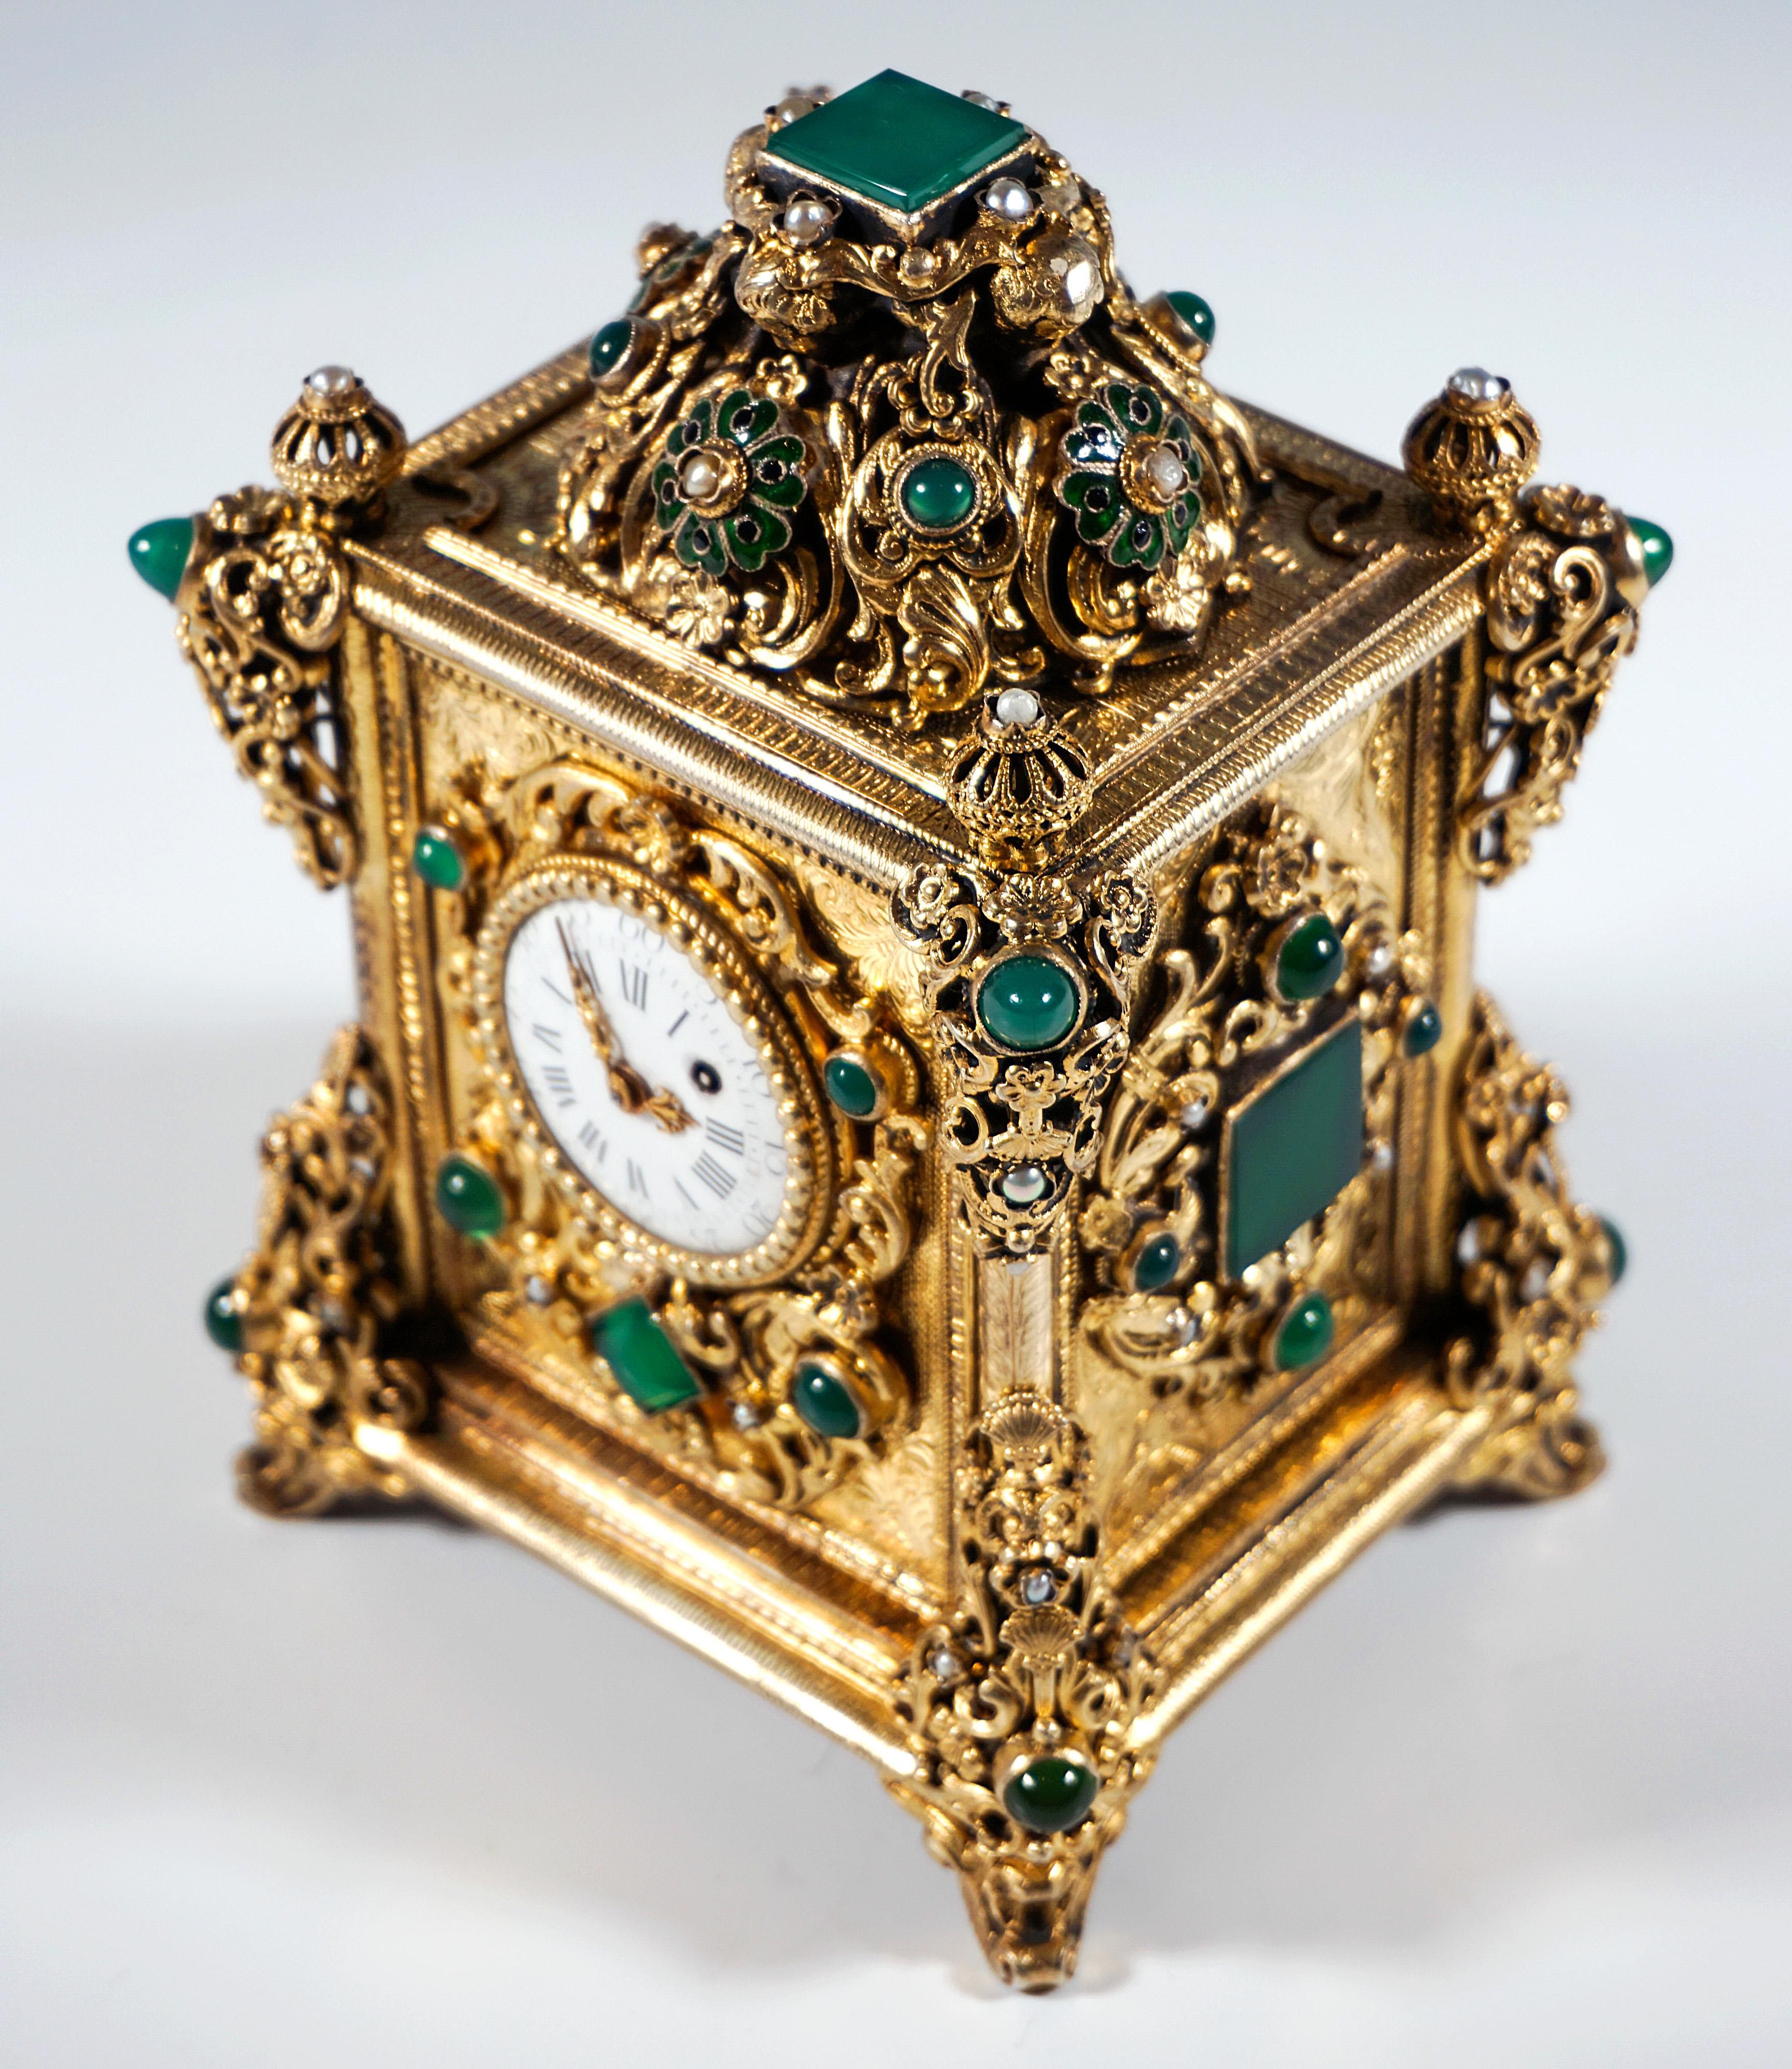 Late 19th Century Viennese Gilt Silver Splendid Table Clock With Green Chalcedony Trimming, C 1880